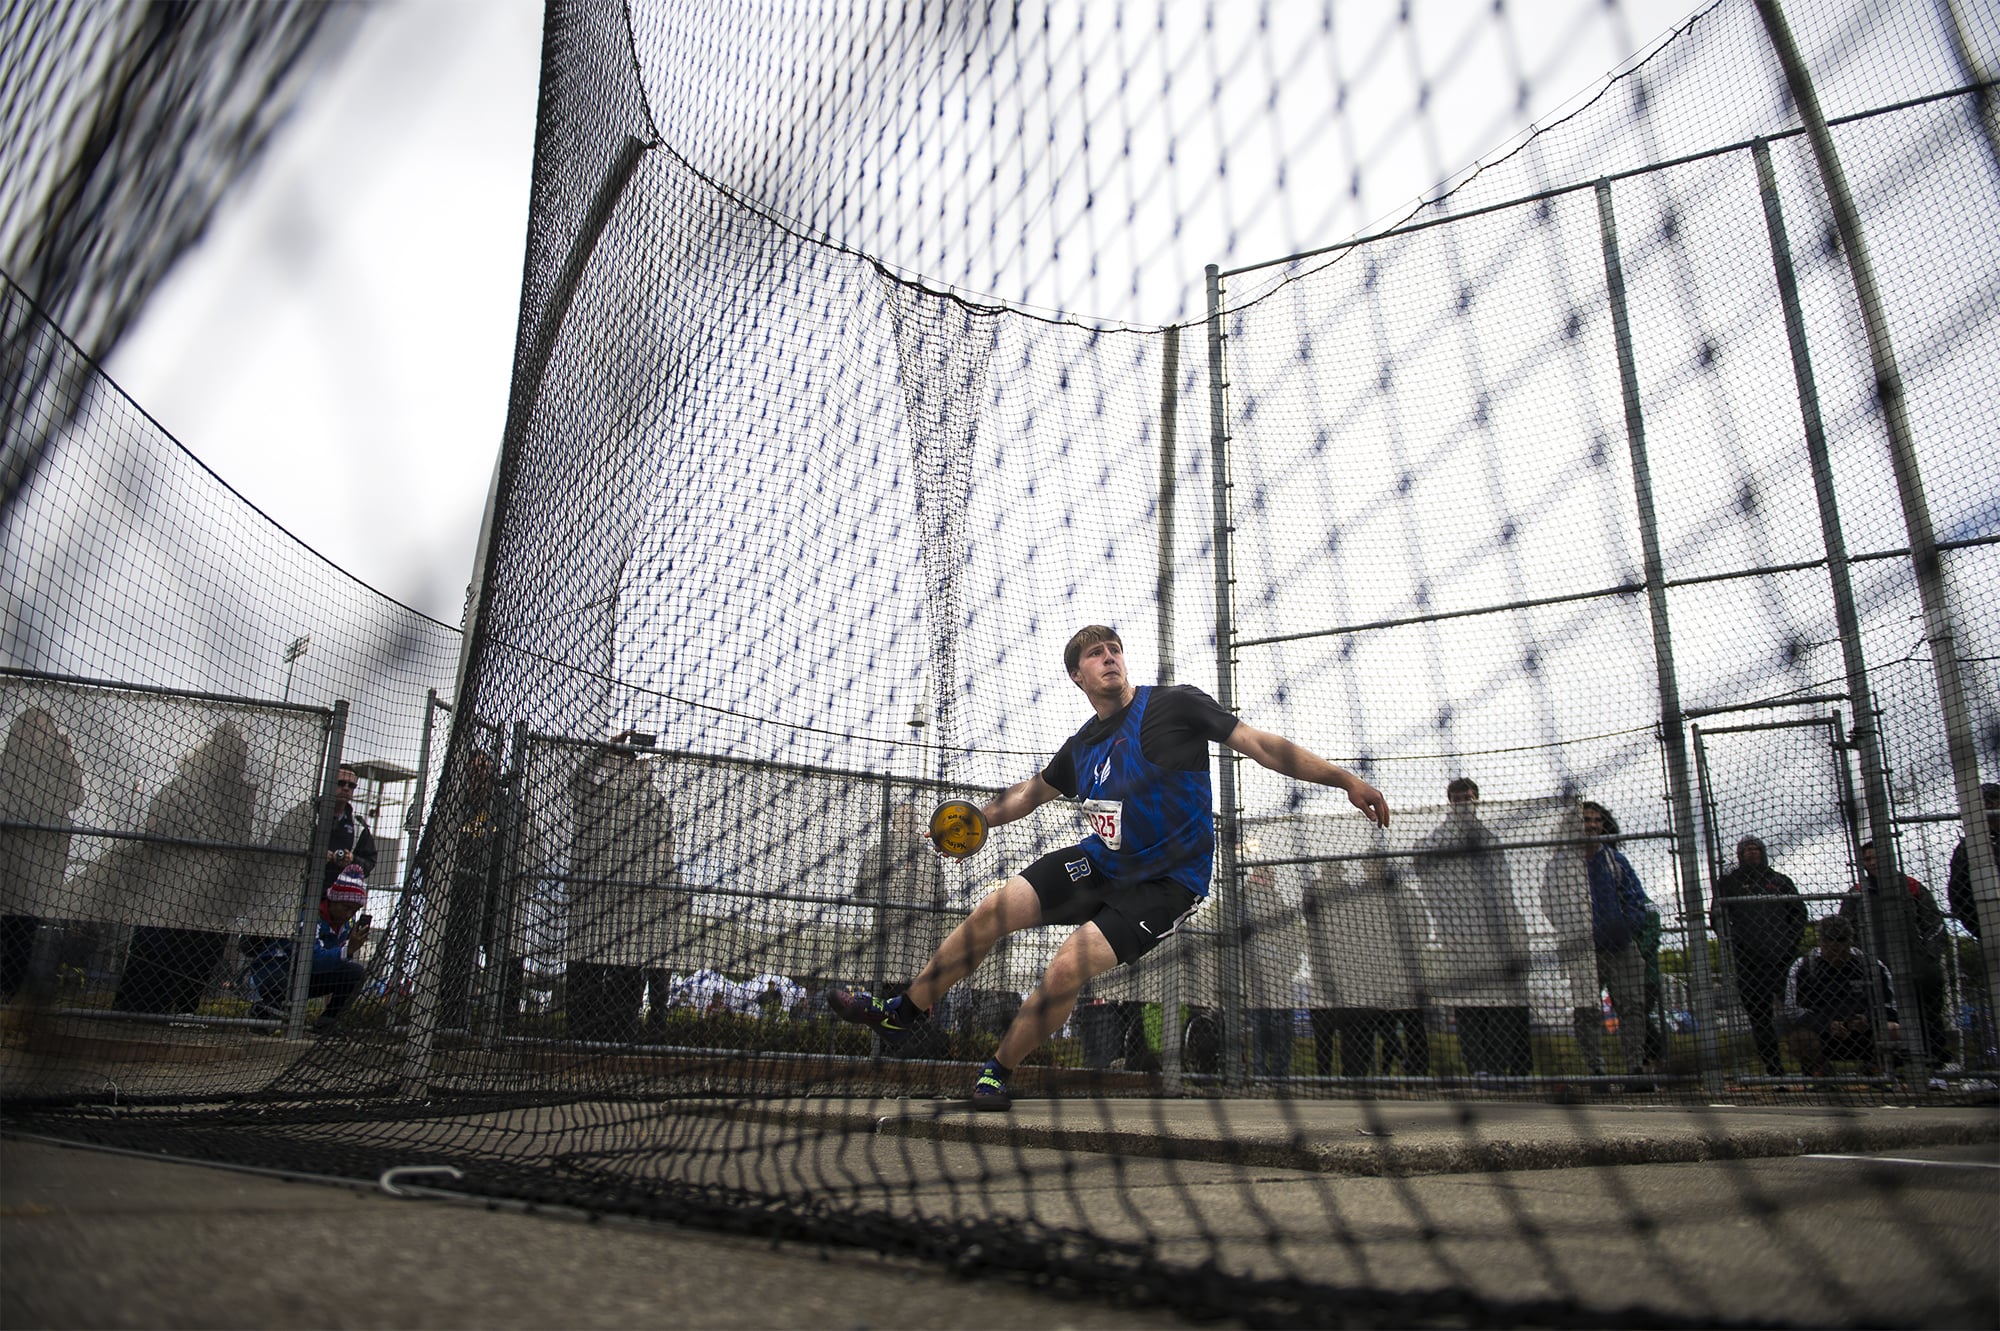 Ridgefield's Trey Knight completes a throw to win the state title during the 2A Boys Discus Throw at the WIAA state track meet at Mount Tahoma High School in Tacoma on Friday, May 24, 2019 (Nathan Howard/The Columbian)